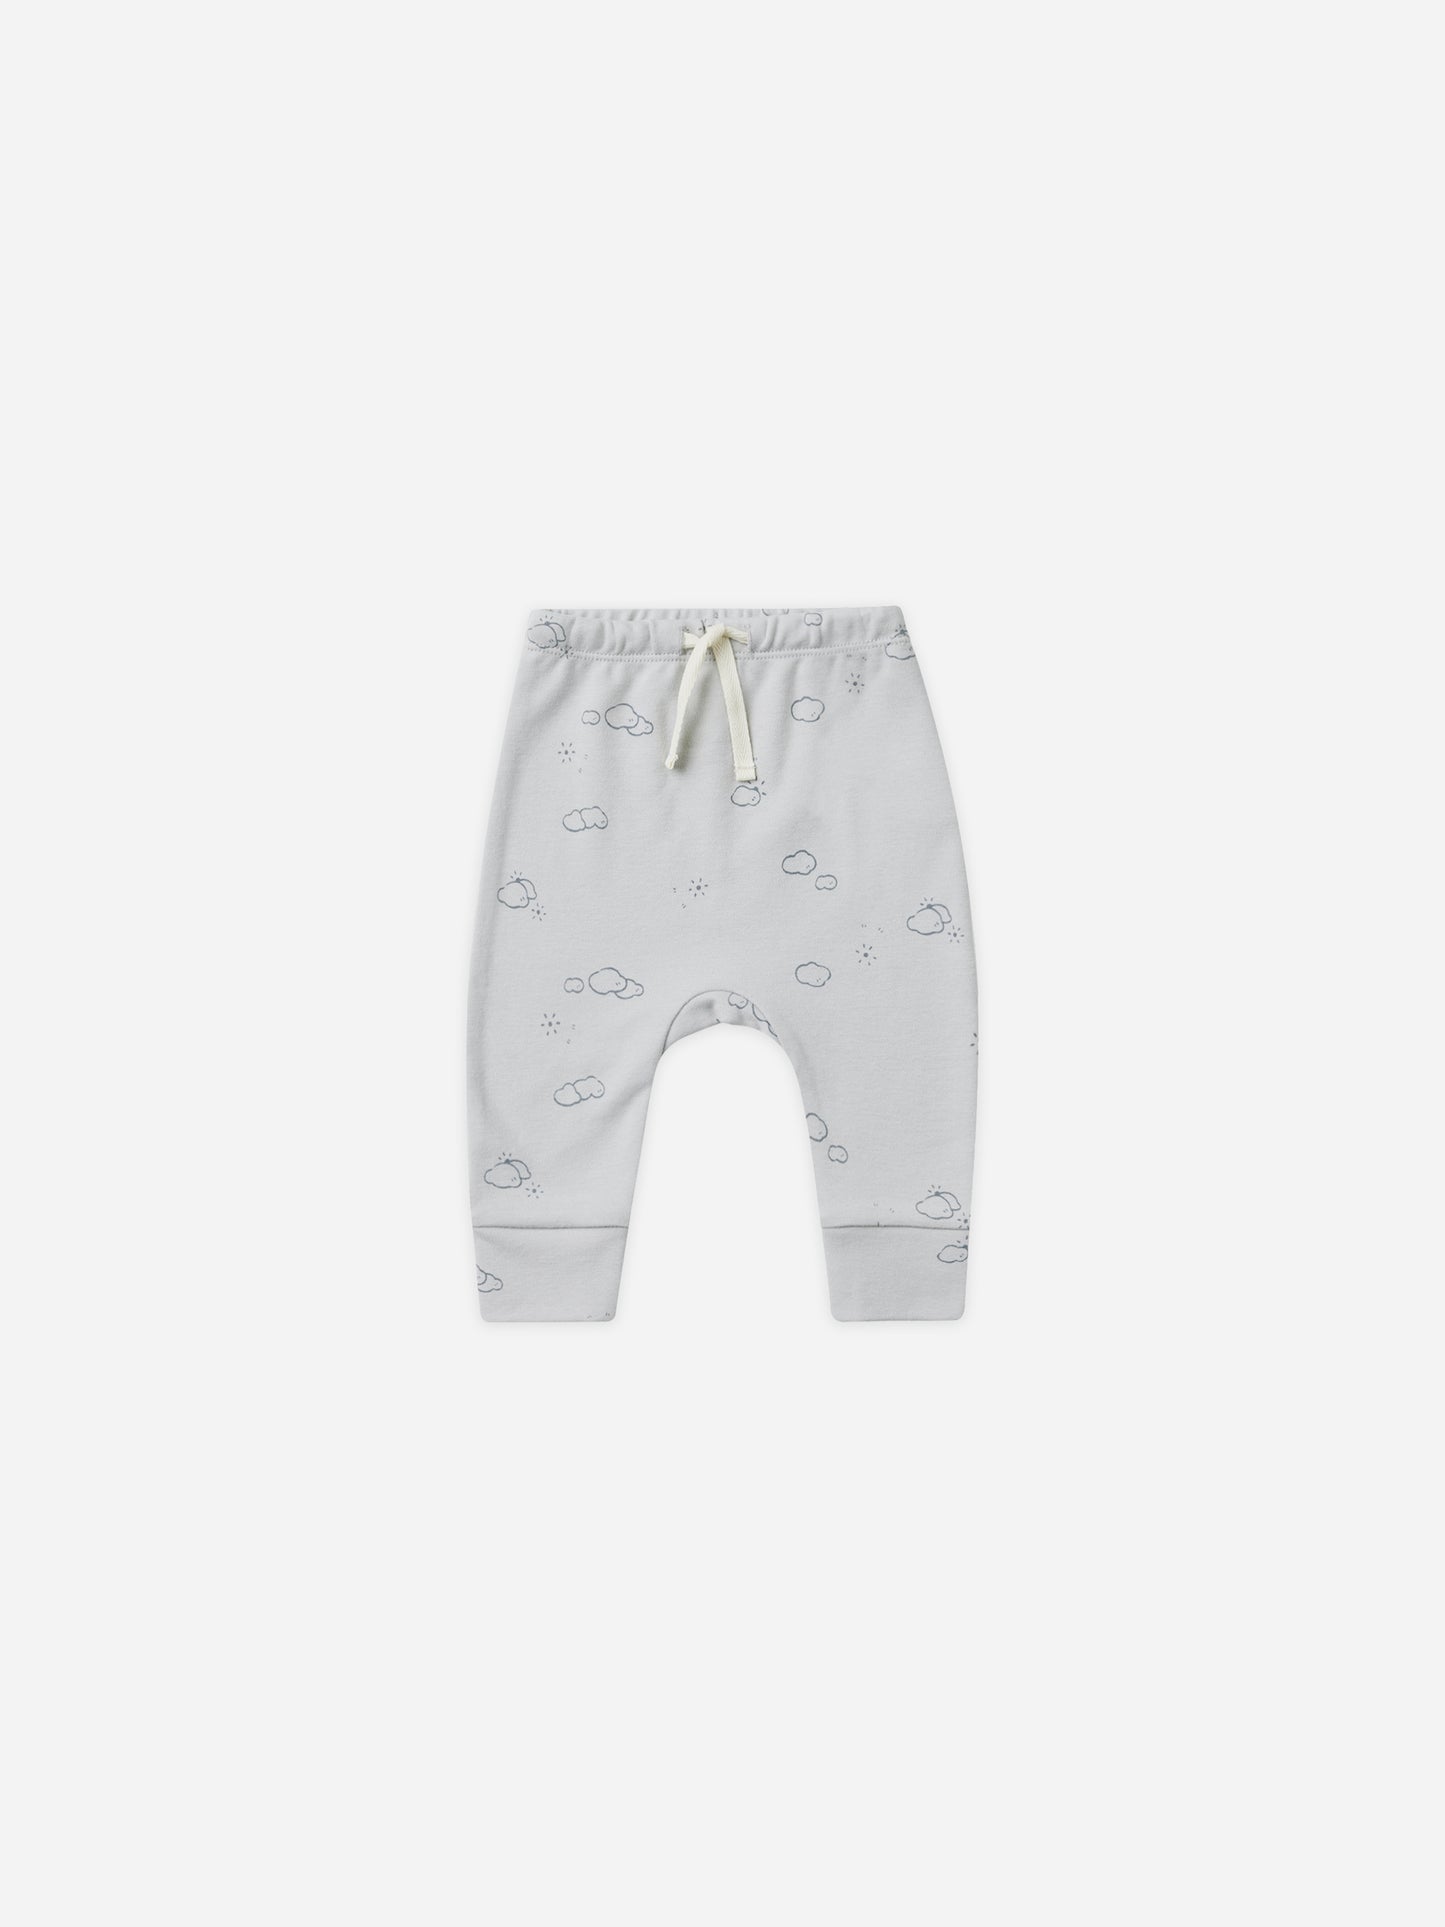 Drawstring Pant || Sunny Day - Rylee + Cru | Kids Clothes | Trendy Baby Clothes | Modern Infant Outfits |